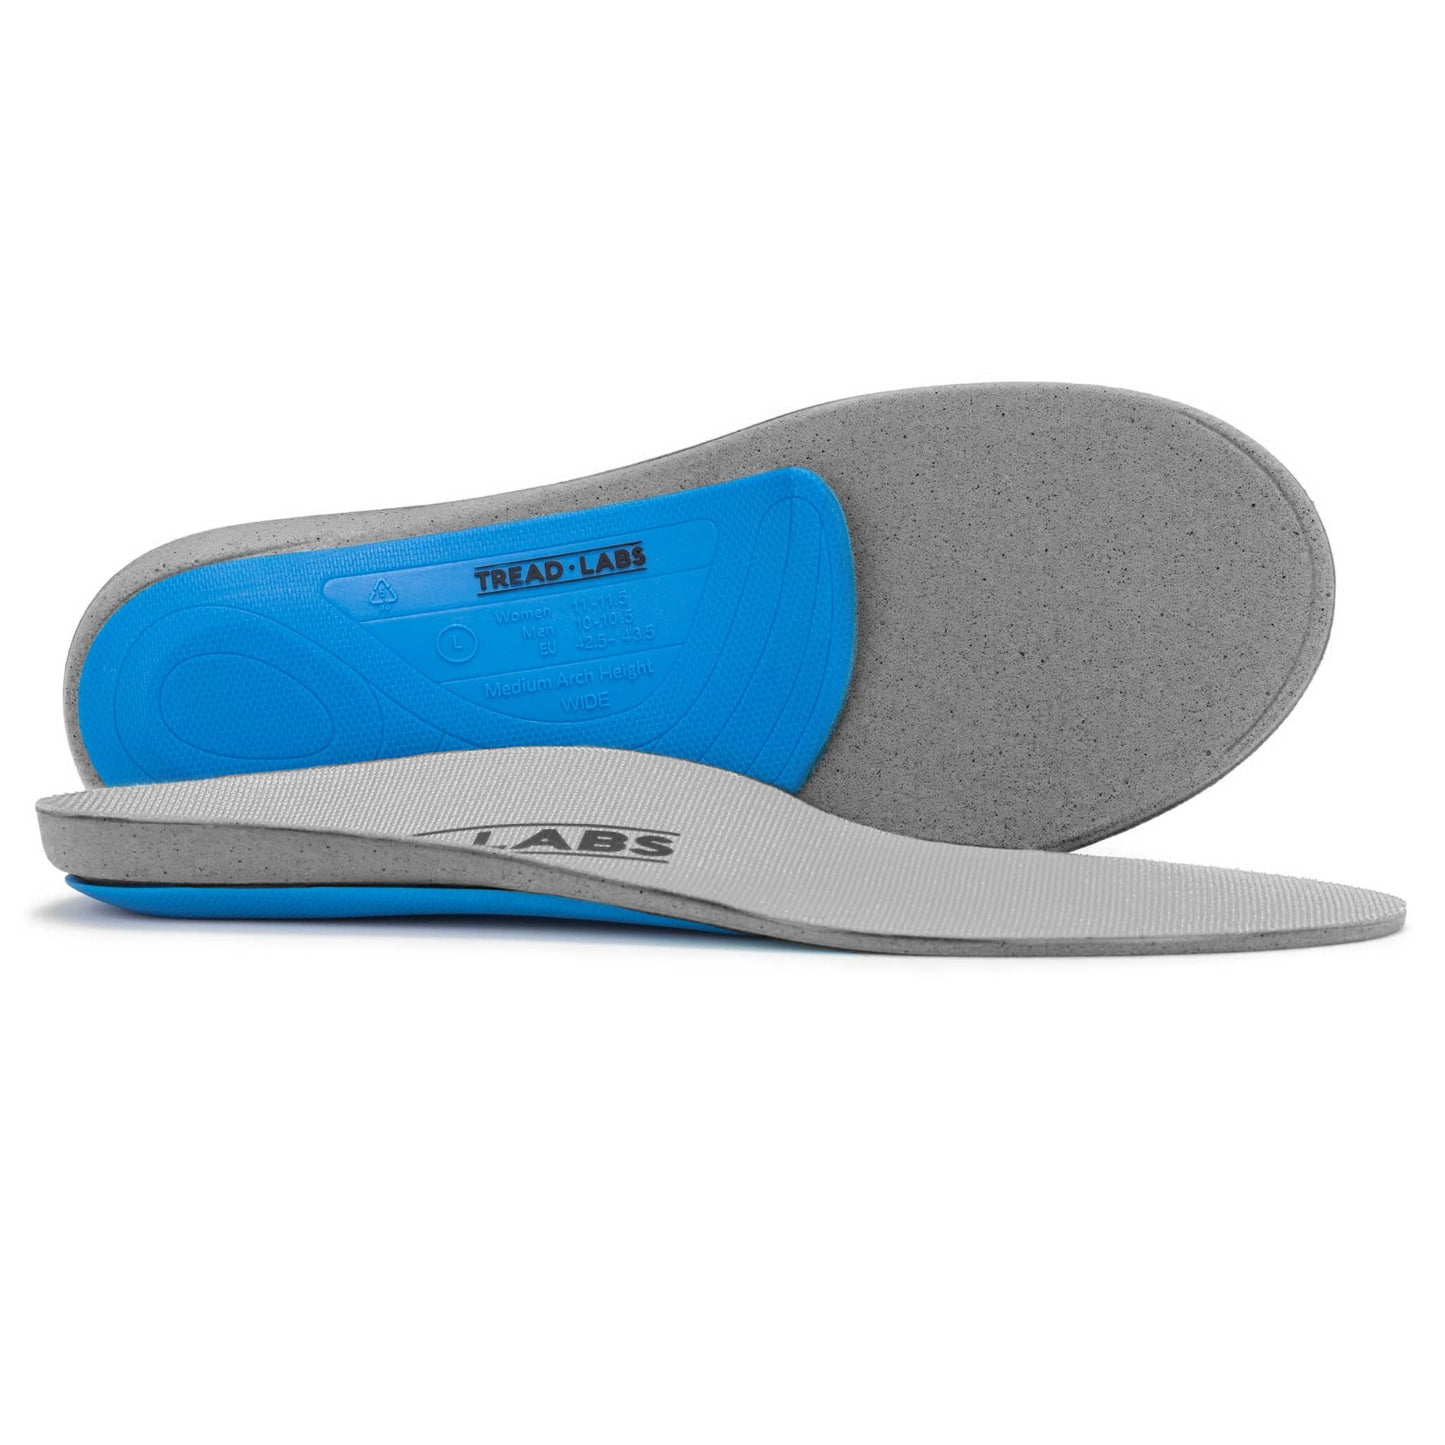 Refreshed Pace Wide Insoles- All Sales Final